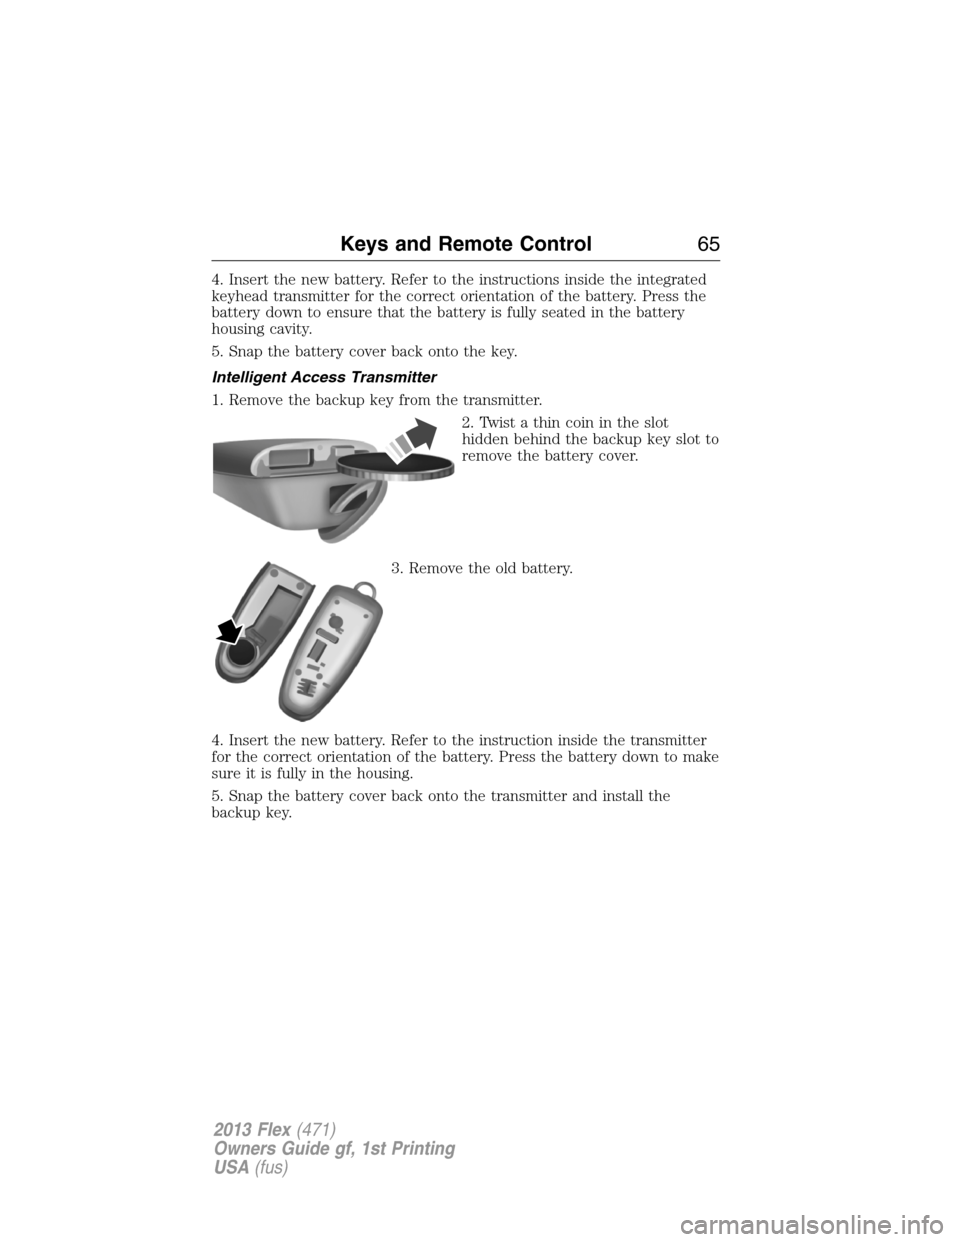 FORD FLEX 2013 1.G Owners Manual 4. Insert the new battery. Refer to the instructions inside the integrated
keyhead transmitter for the correct orientation of the battery. Press the
battery down to ensure that the battery is fully se